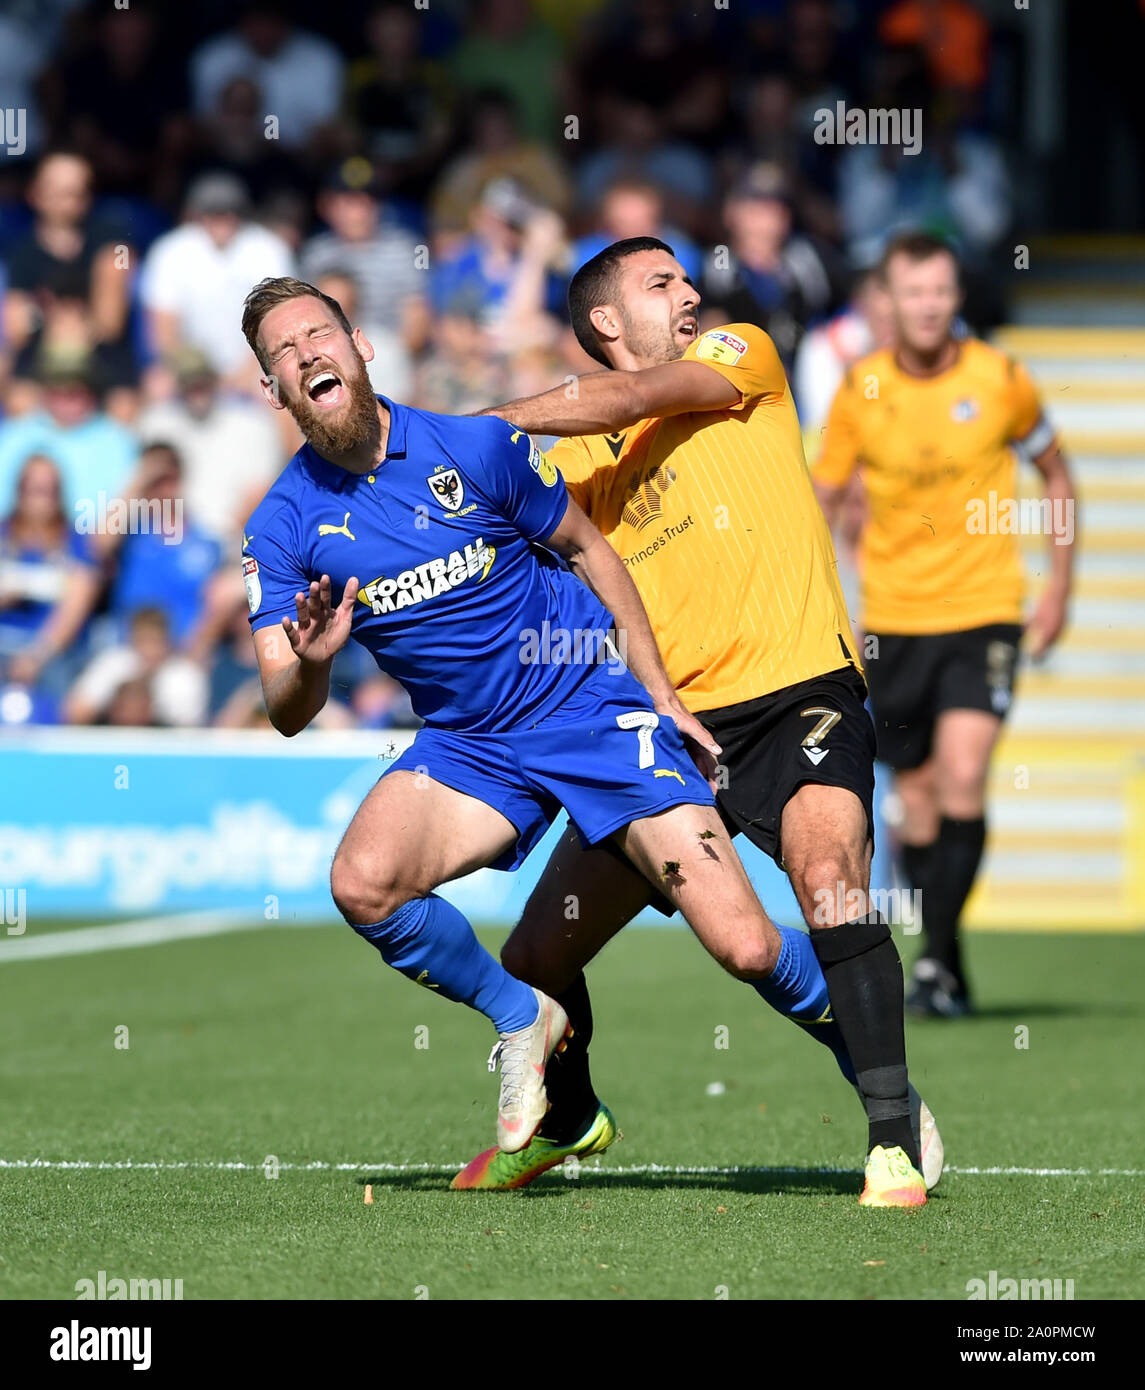 London UK 21 September 2019 - Scott Wagstaff of AFC Wimbledon (left) is fouled by Liam Sercombe of Bristol Rovers during the Sky Bet League One football match between AFC Wimbledon and Bristol Rovers at the Cherry Red Records Stadium - Editorial use only. No merchandising. For Football images FA and Premier League restrictions apply inc. no internet/mobile usage without FAPL license - for details contact Football Dataco. Credit  : Simon Dack TPI / Alamy Live News Stock Photo